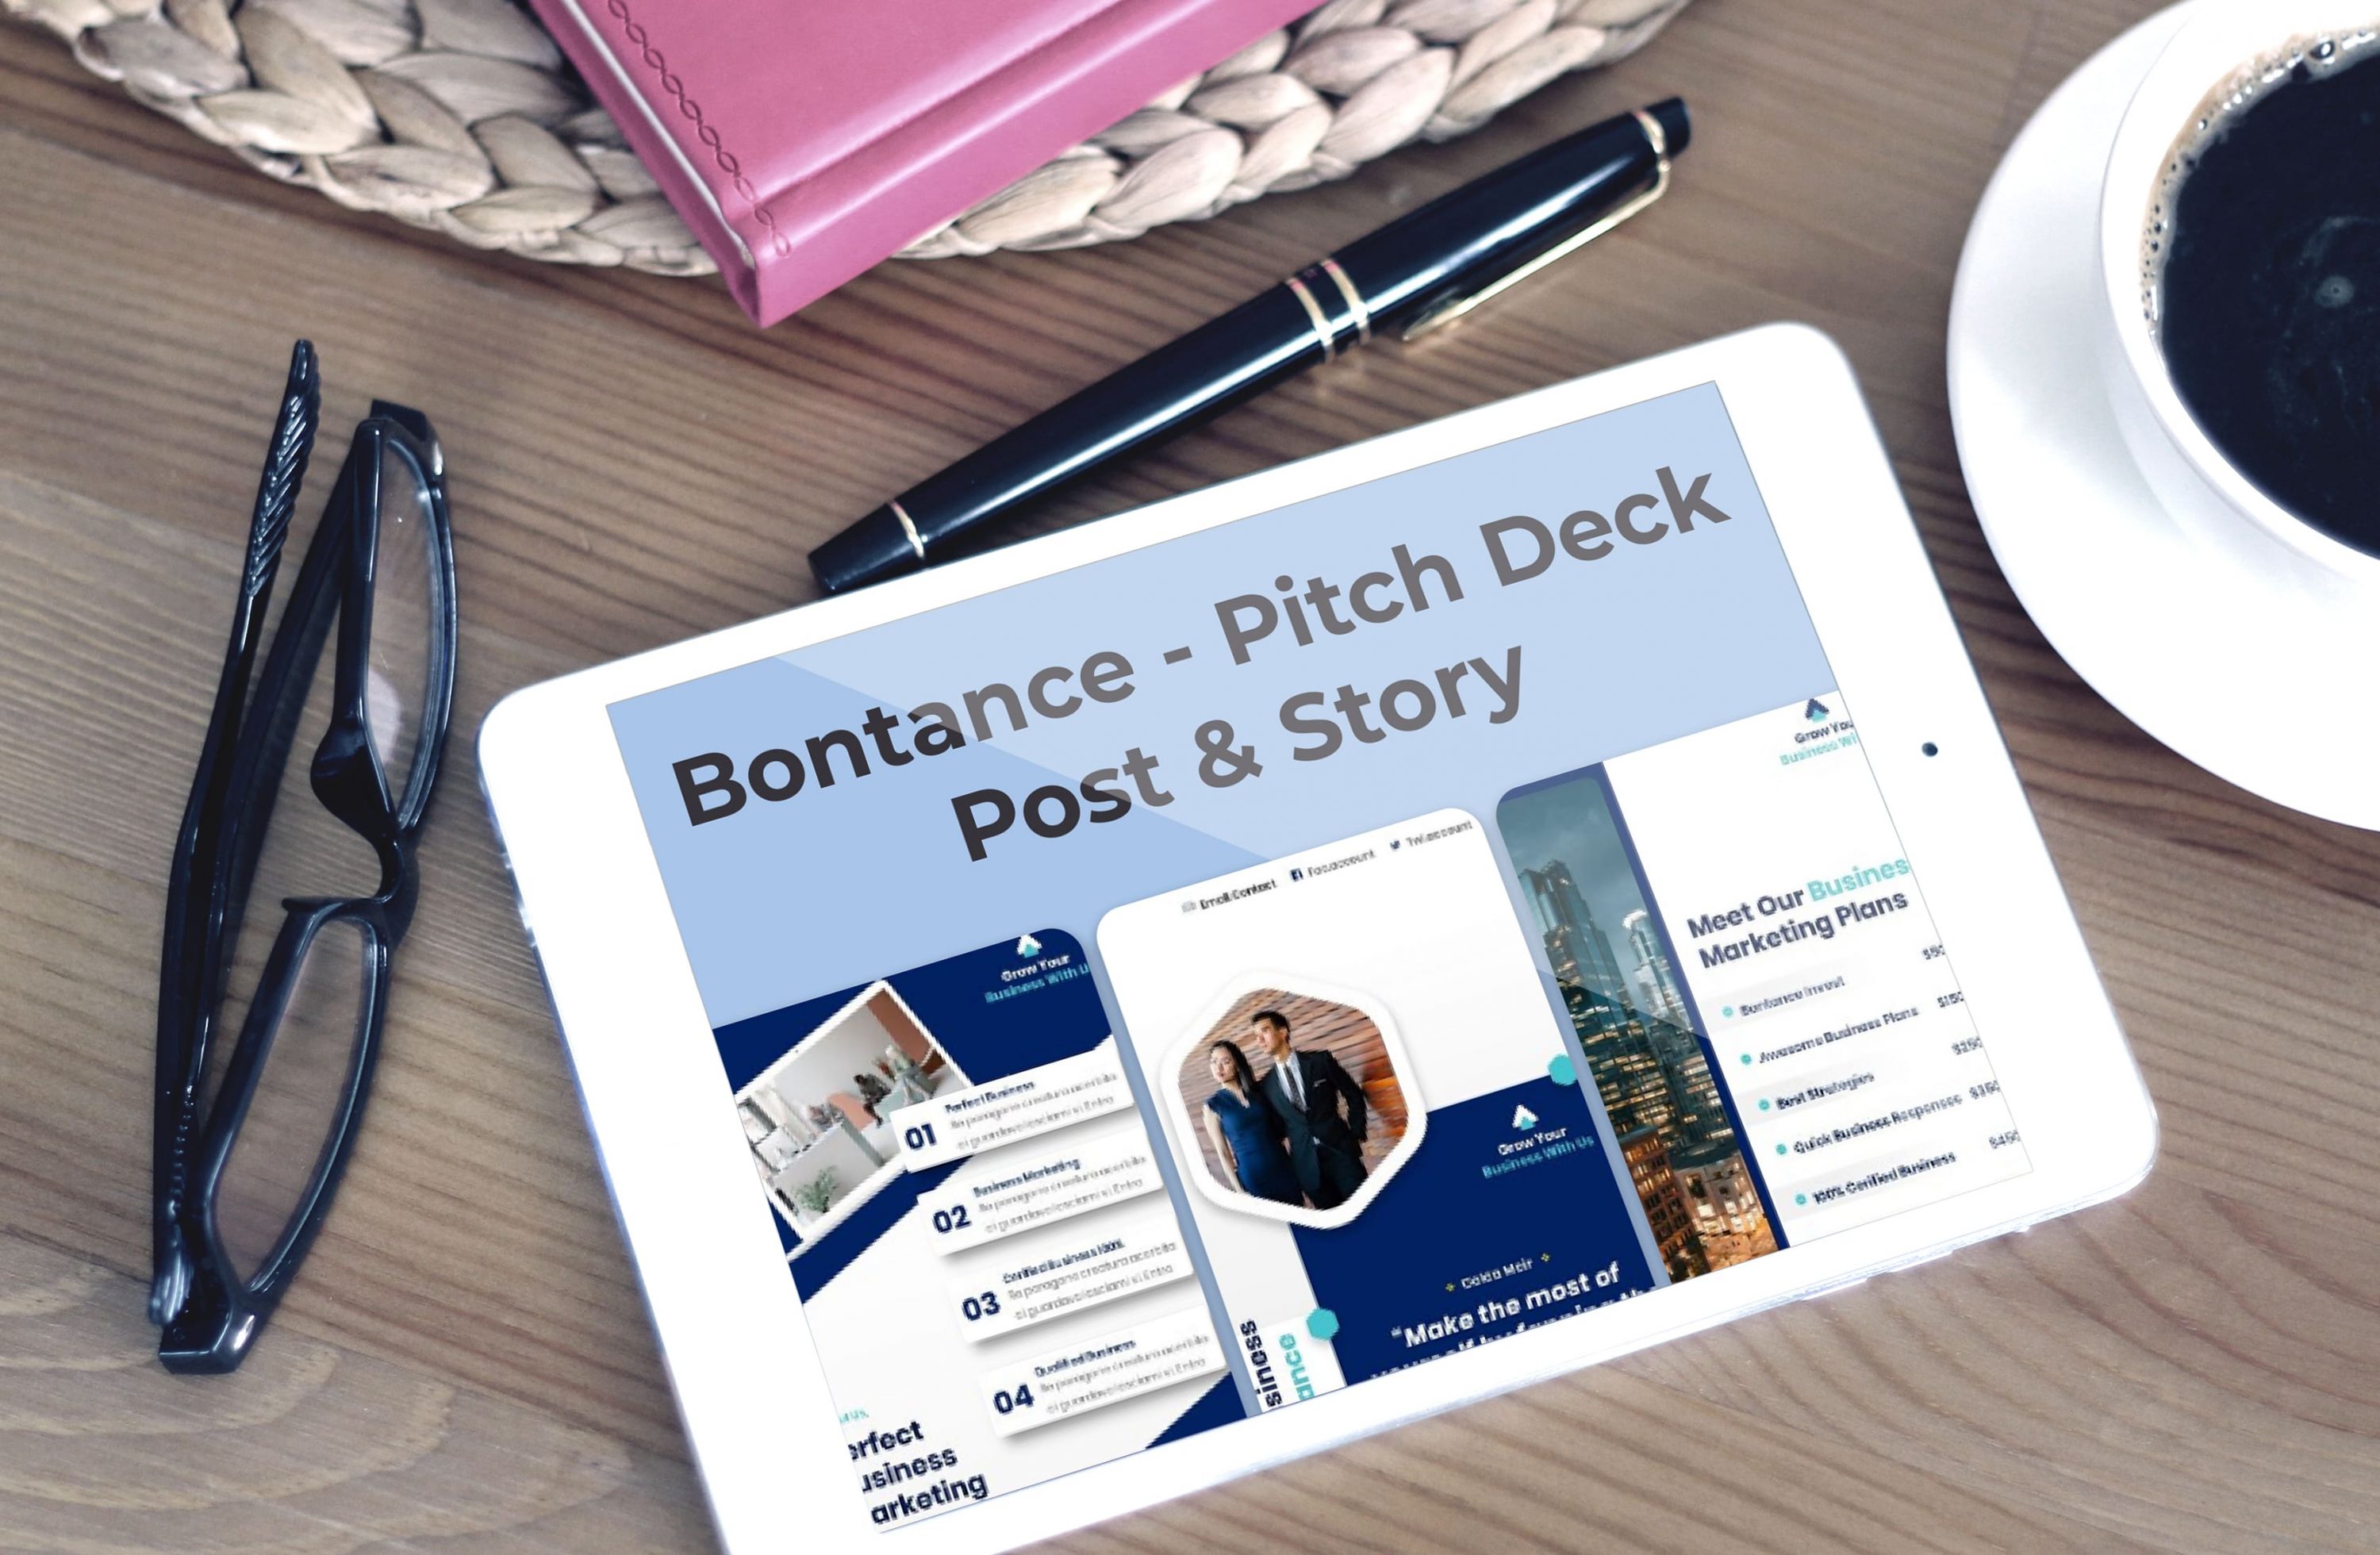 Tablet option of the Bontance - Pitch Deck Post & Story.